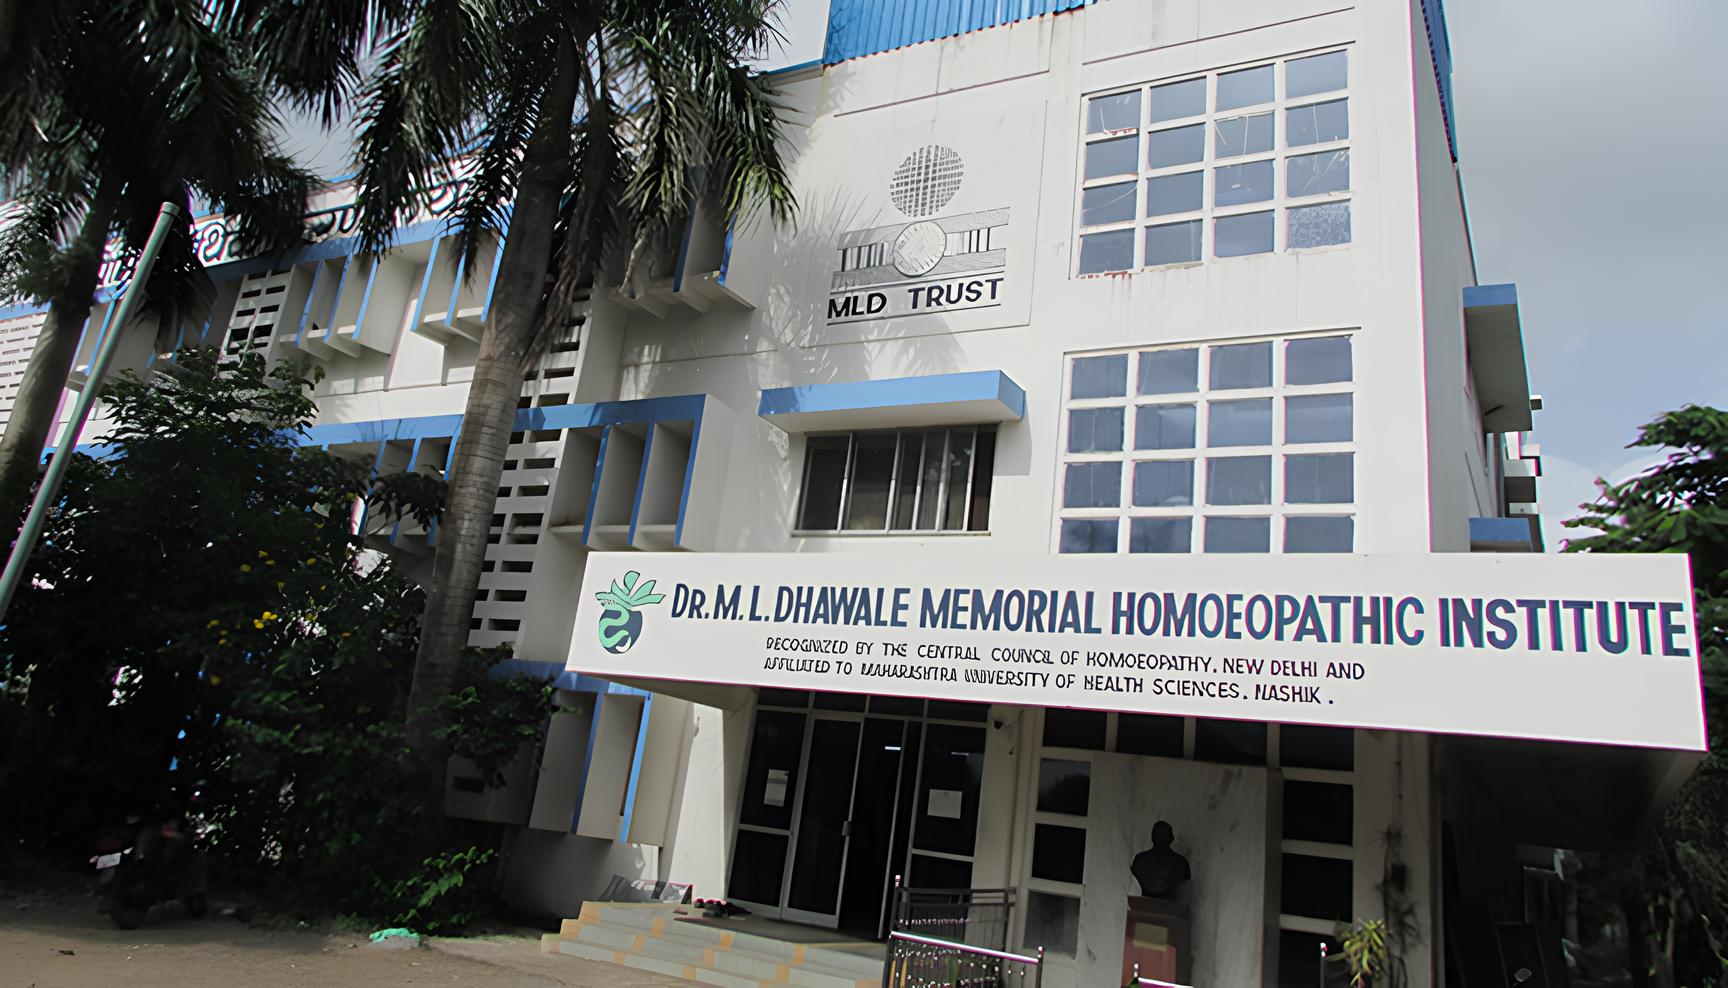 Dr ML Dhawale Memorial Homoeopathic Institute Palghar Admission, Courses, Eligibility, Fees, Facilities